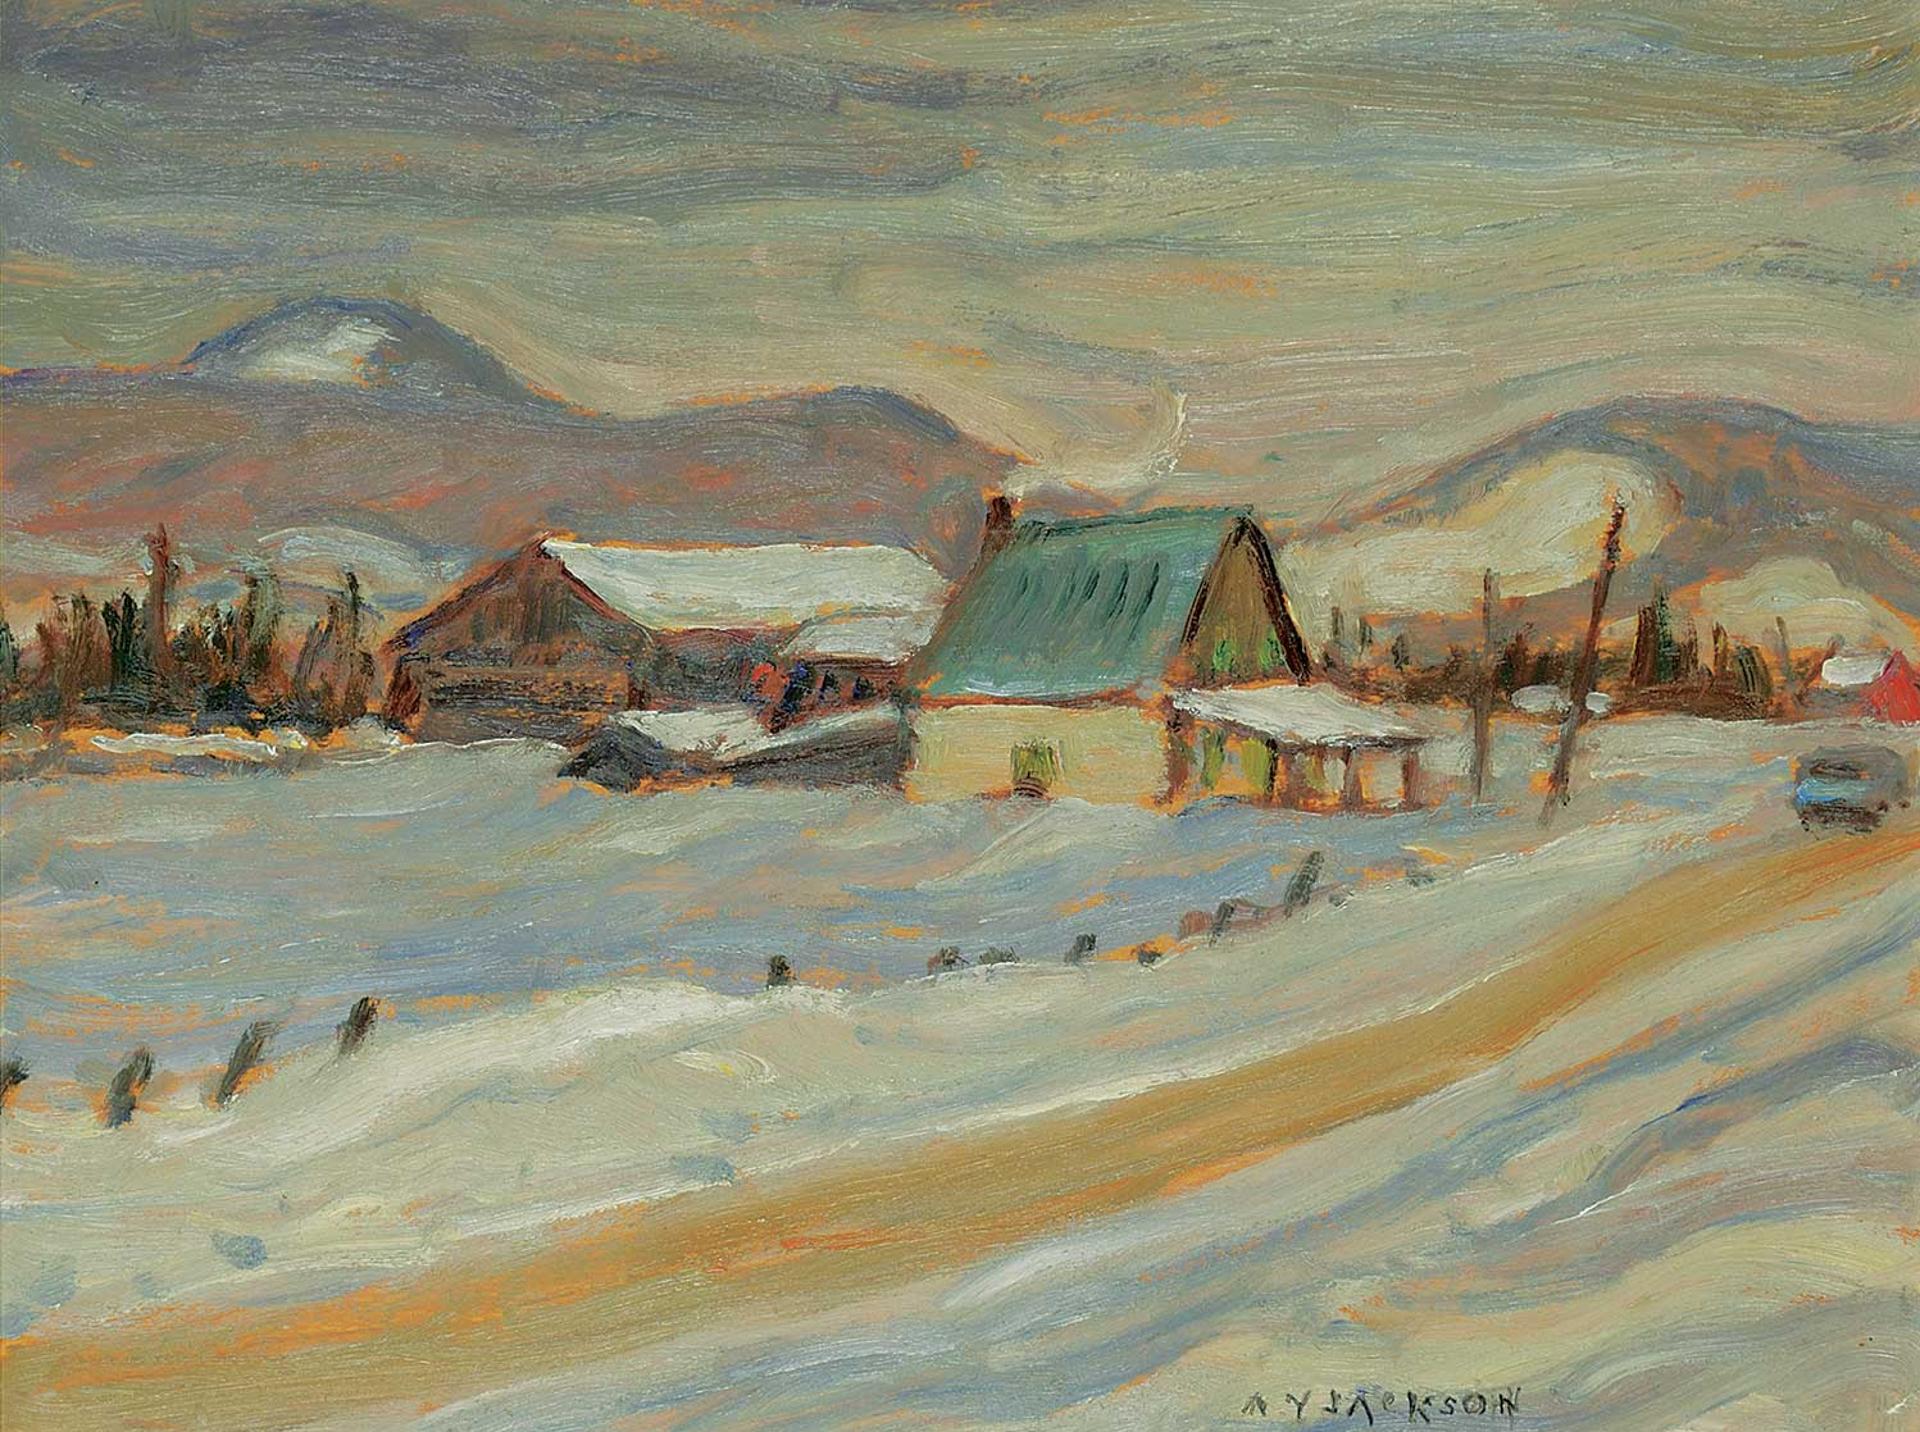 Alexander Young (A. Y.) Jackson (1882-1974) - Road North of St. Agathe, February 29, 1964